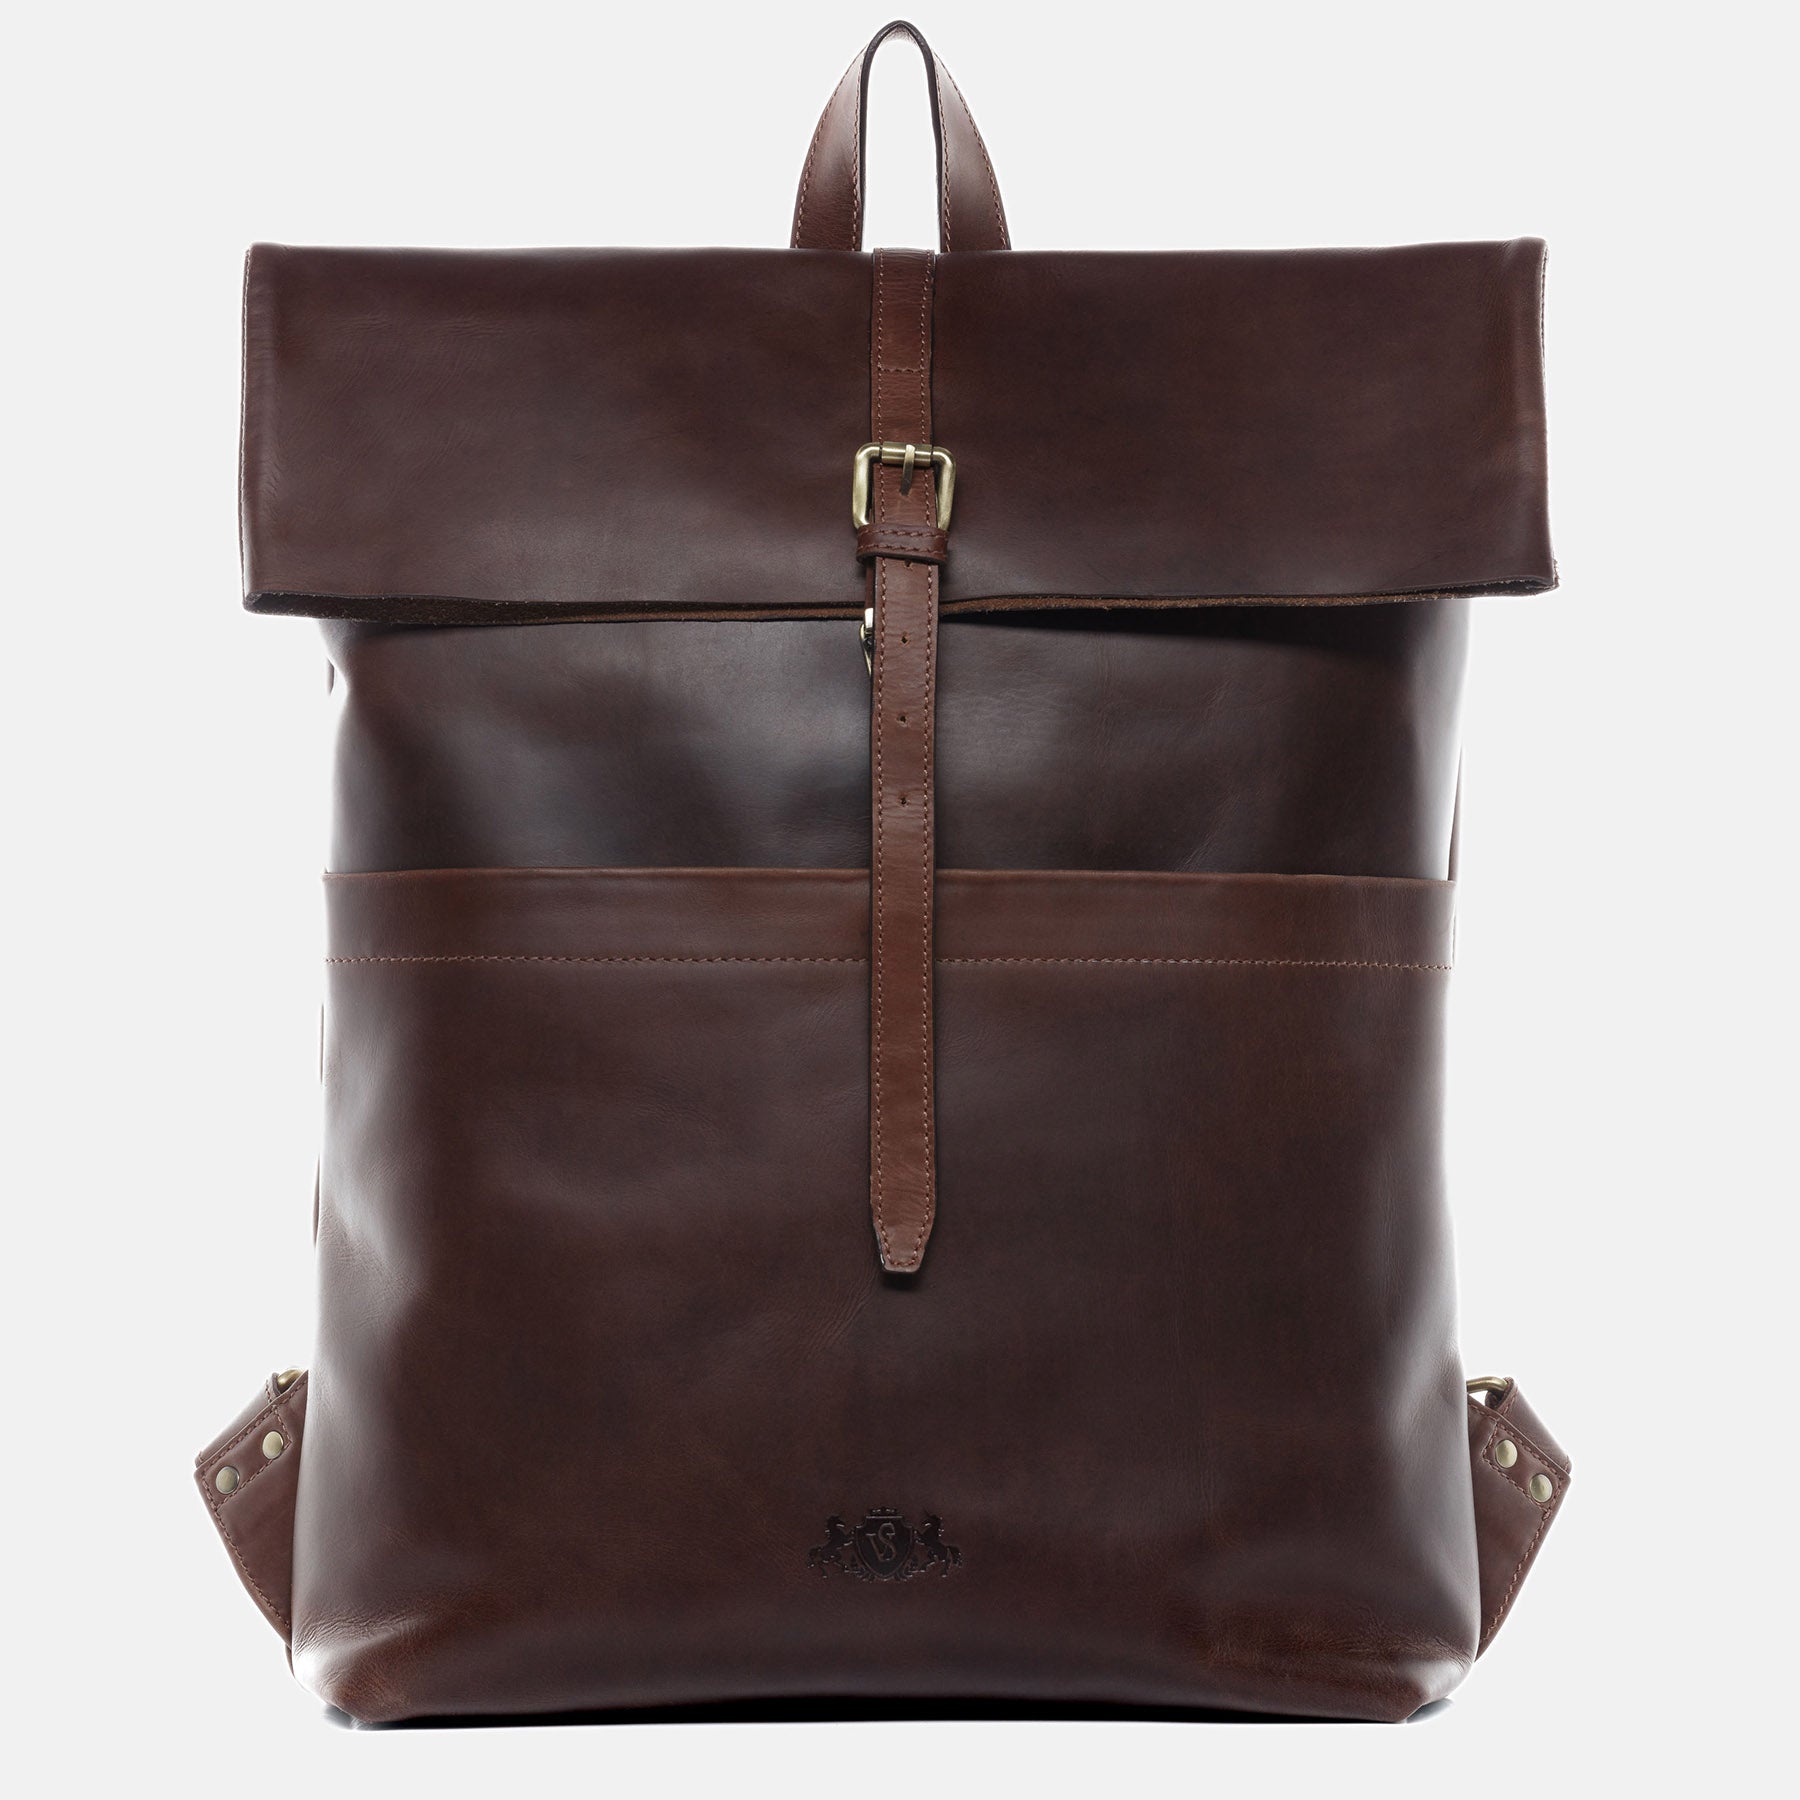 Rolltop backpack CLAY smooth leather brown